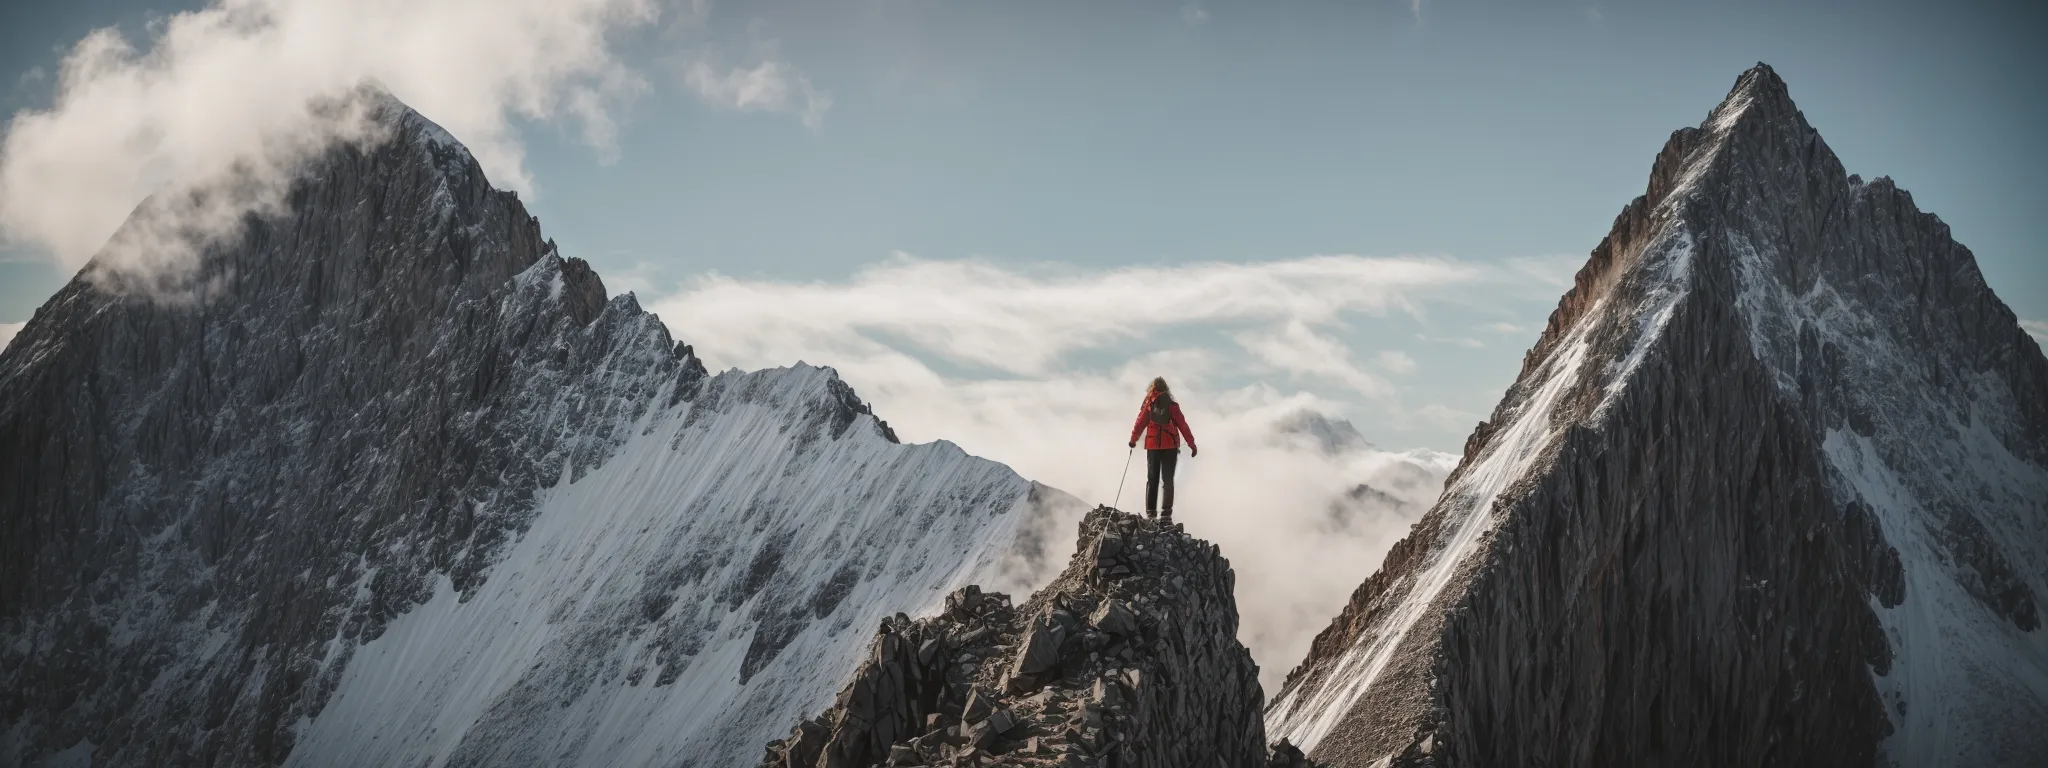 a woman triumphantly reaches the summit of a steep mountain, symbolizing rhea drysdale's ascension to seo mastery.